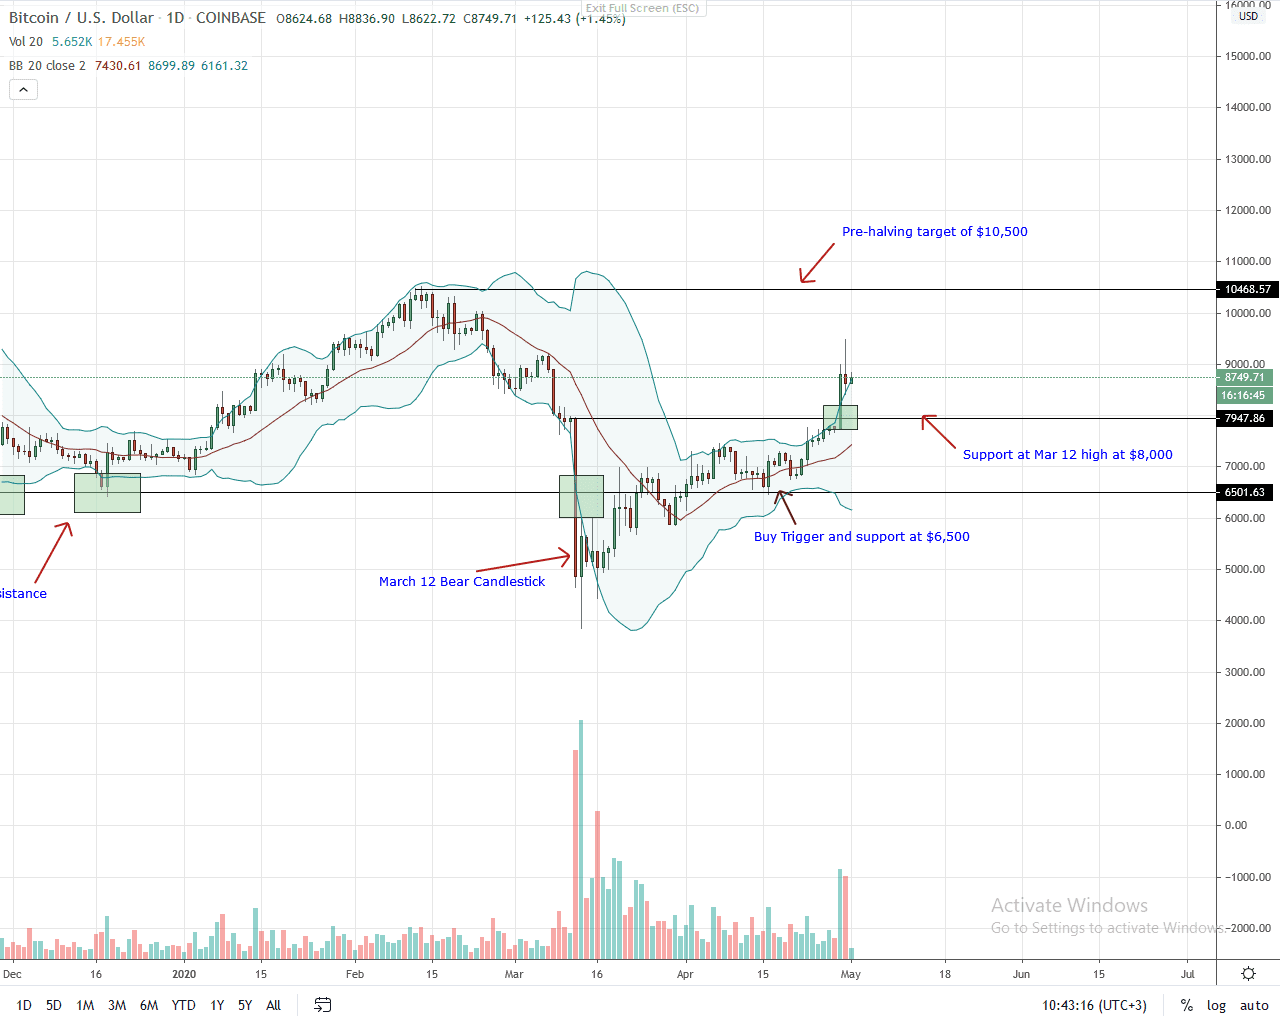 Bitcoin Daily Chart for May 1